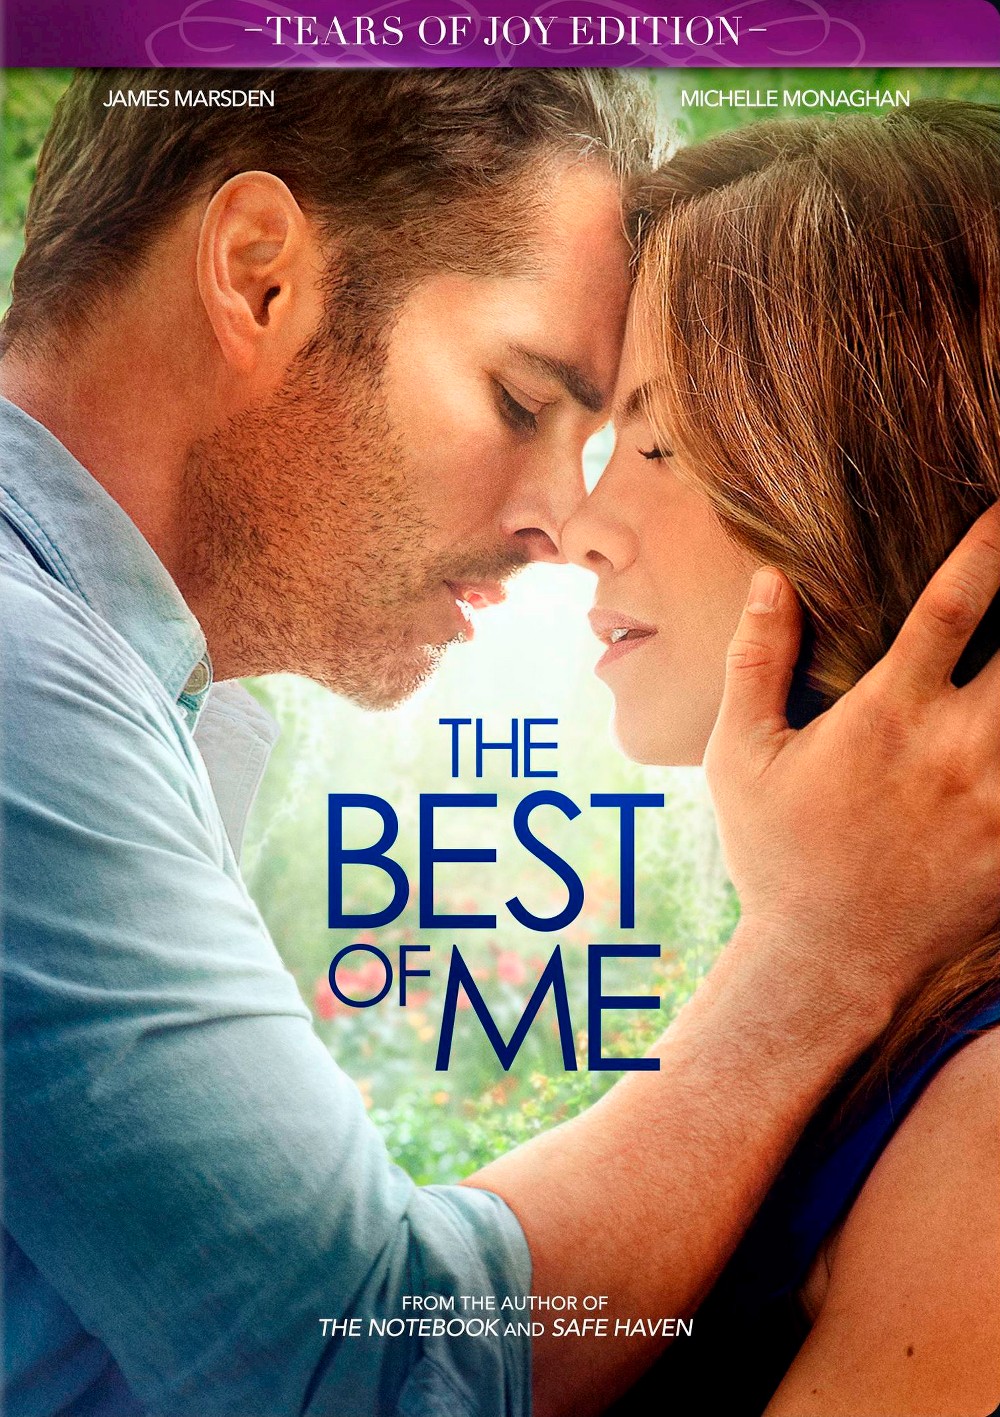 The Best of Me (DVD) - image 2 of 4